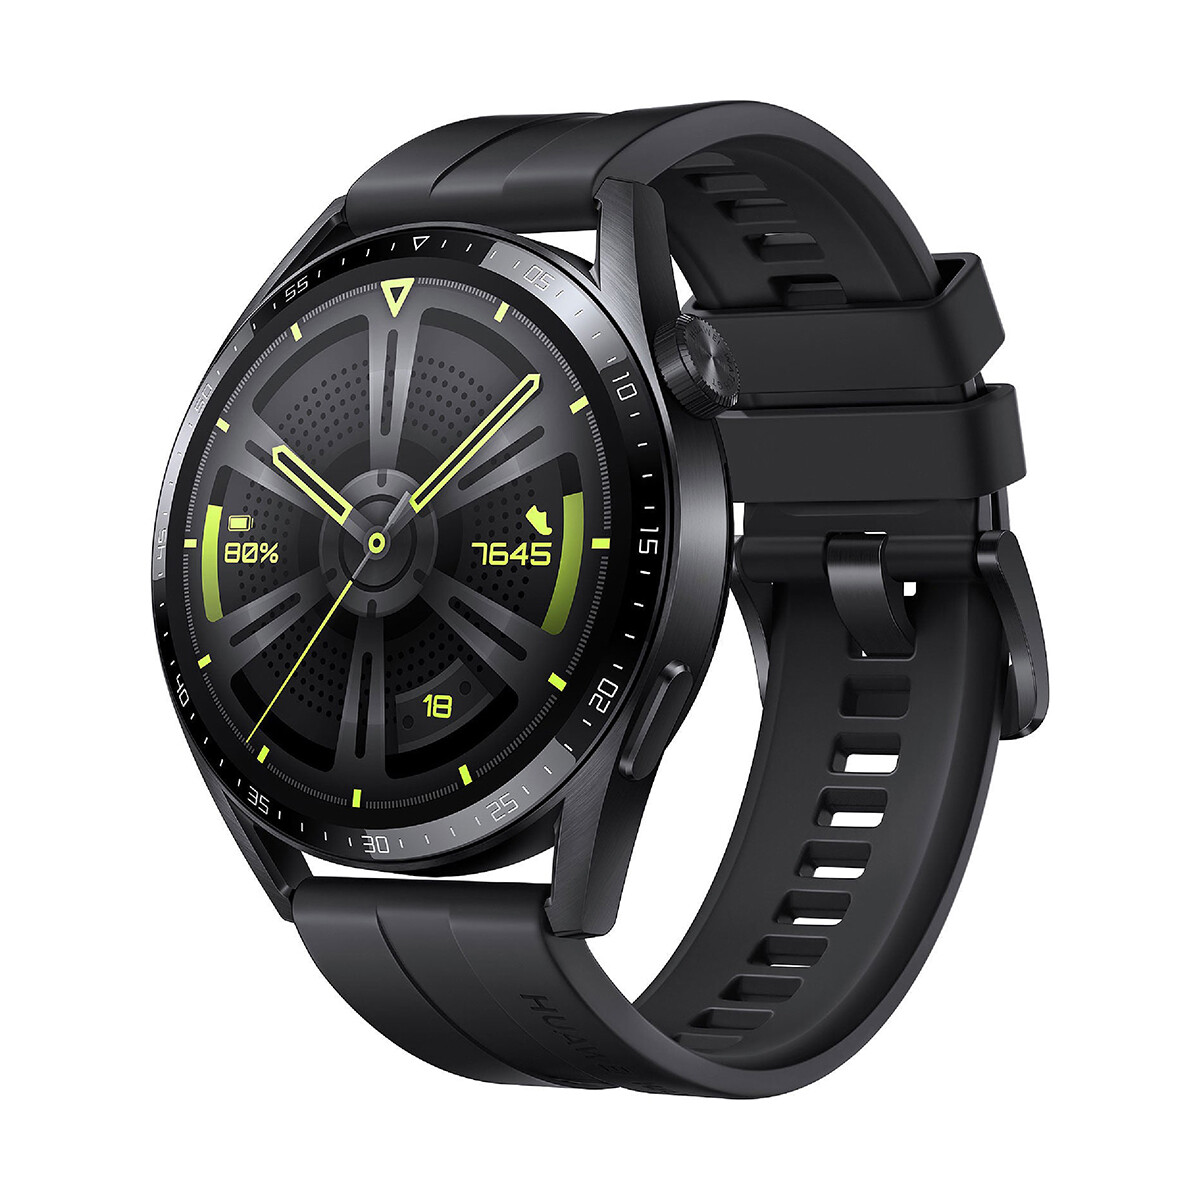 Huawei gt 3 active edition smartwatch 46mm - Black 